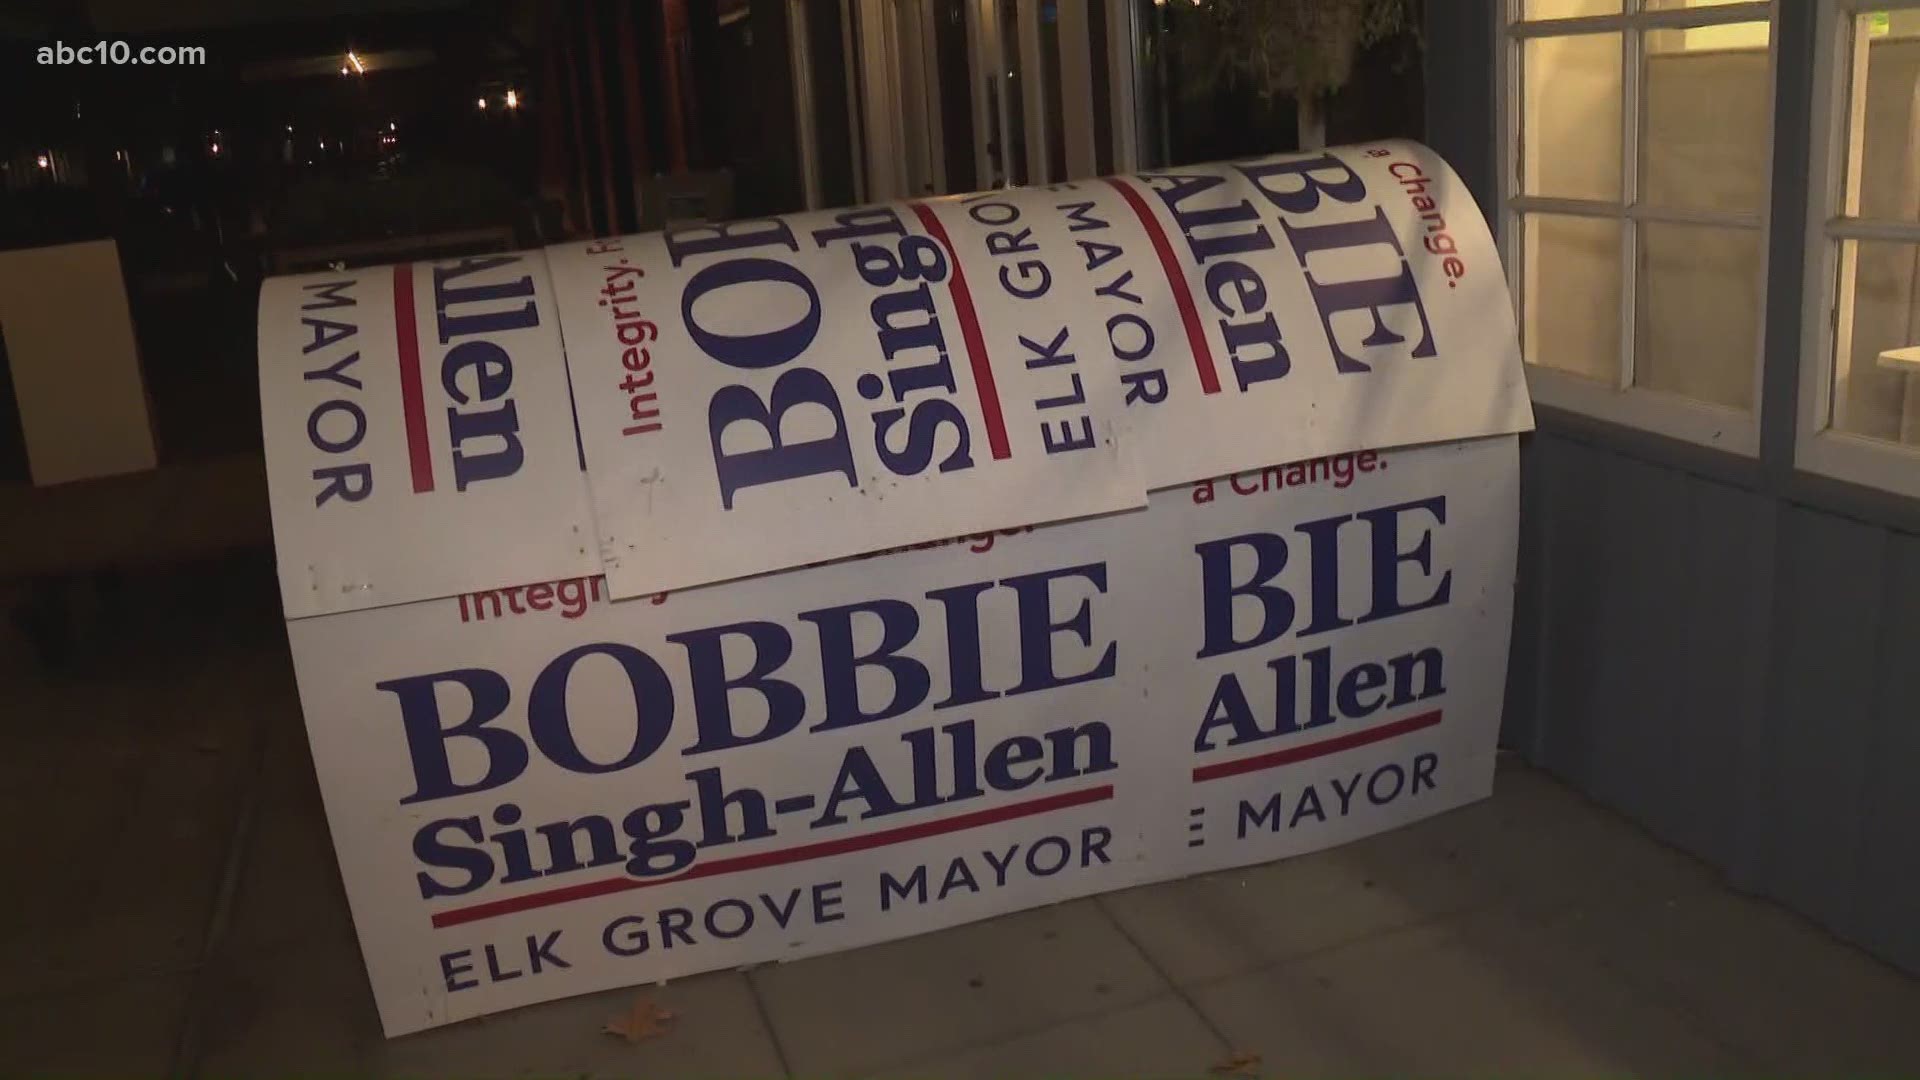 'The Atrium 916' upcycles old political signs into usable housing